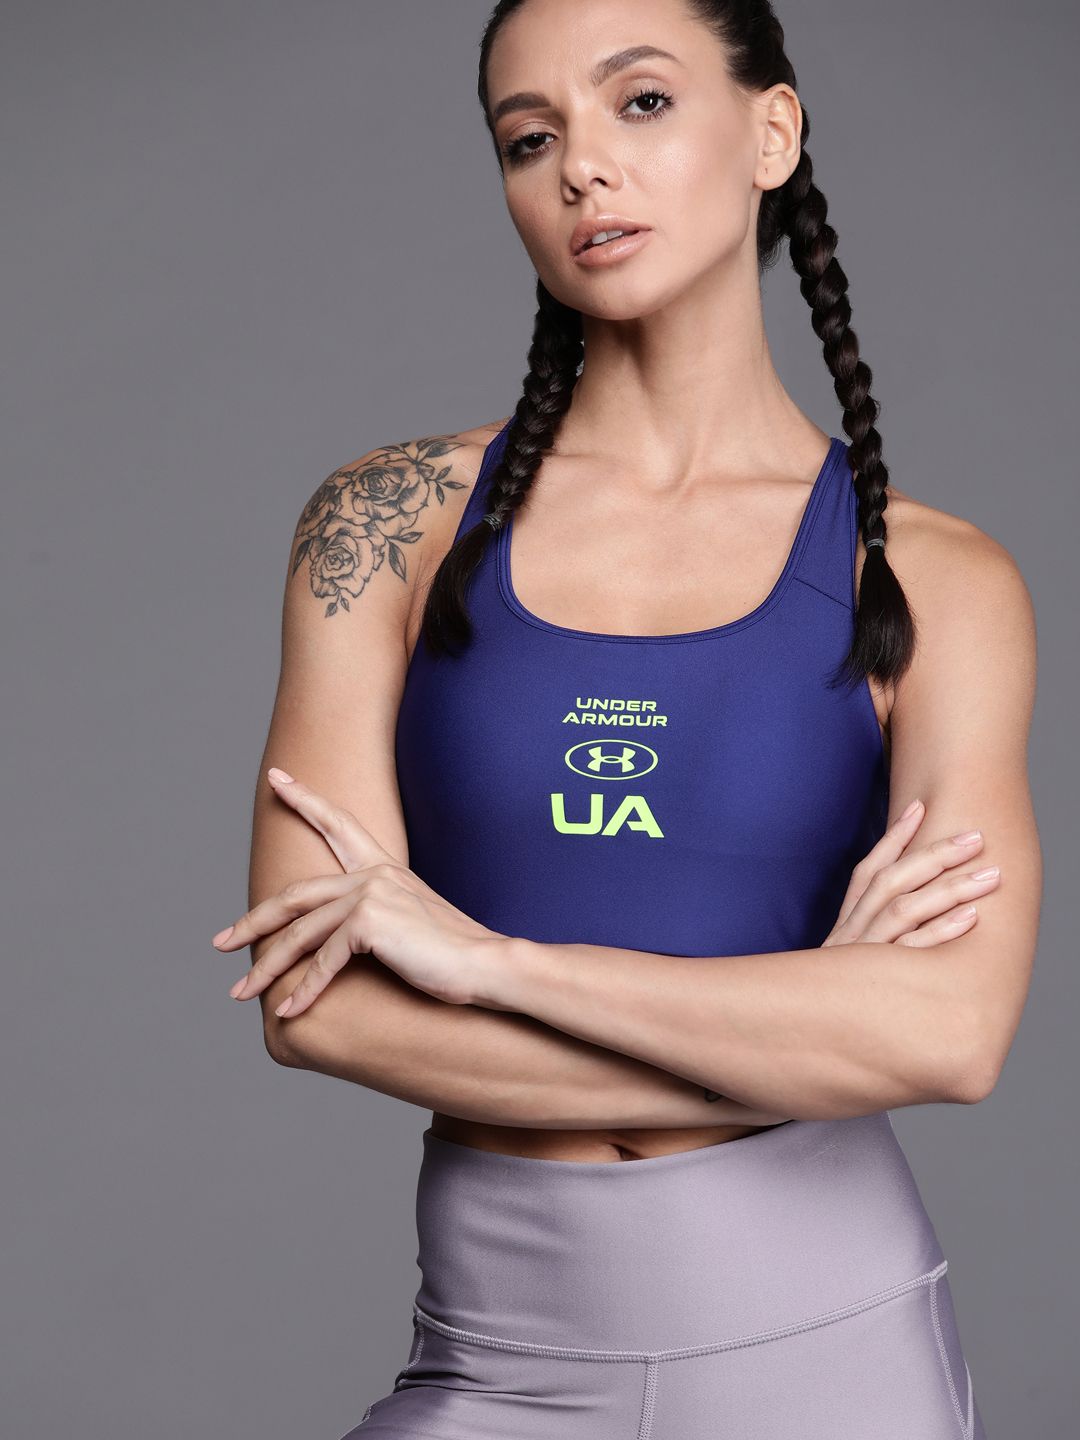 UNDER ARMOUR Blue Typography Workout Bra - Medium Coverage Lightly Padded Price in India